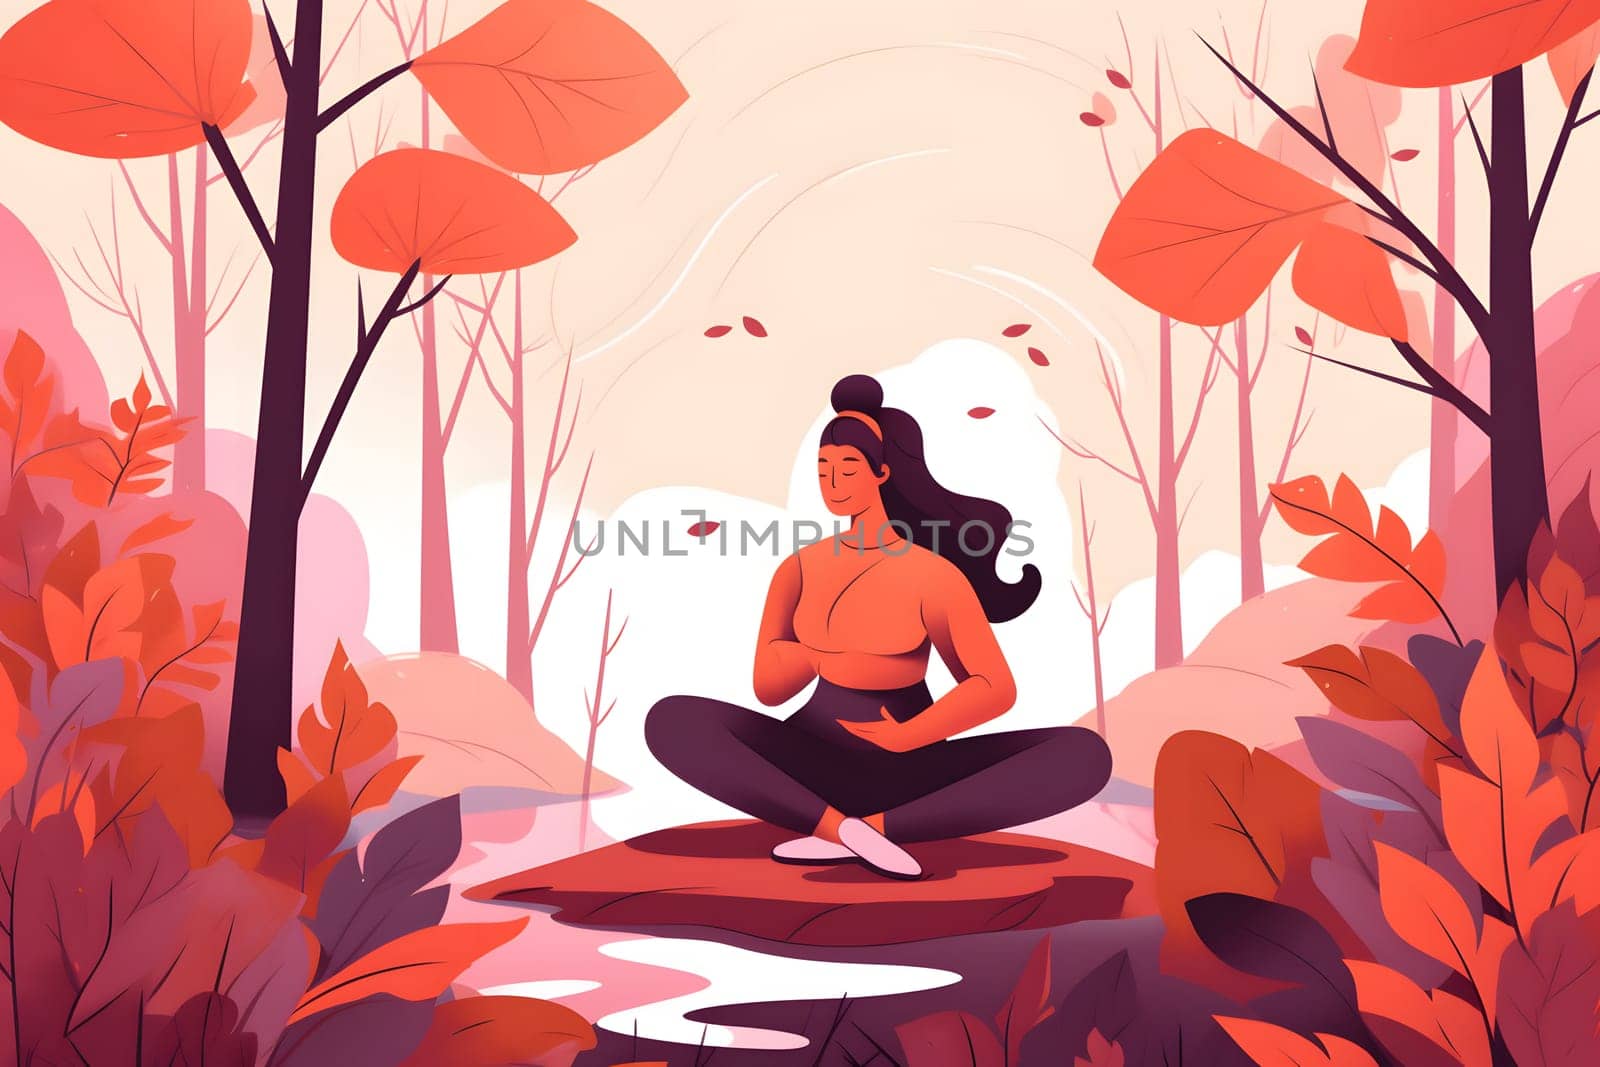 2d flat style illustration of woman meditating in autumnal forest in lotus position surrounded with leaves. Neural network generated in May 2023. Not based on any actual person, scene or pattern.